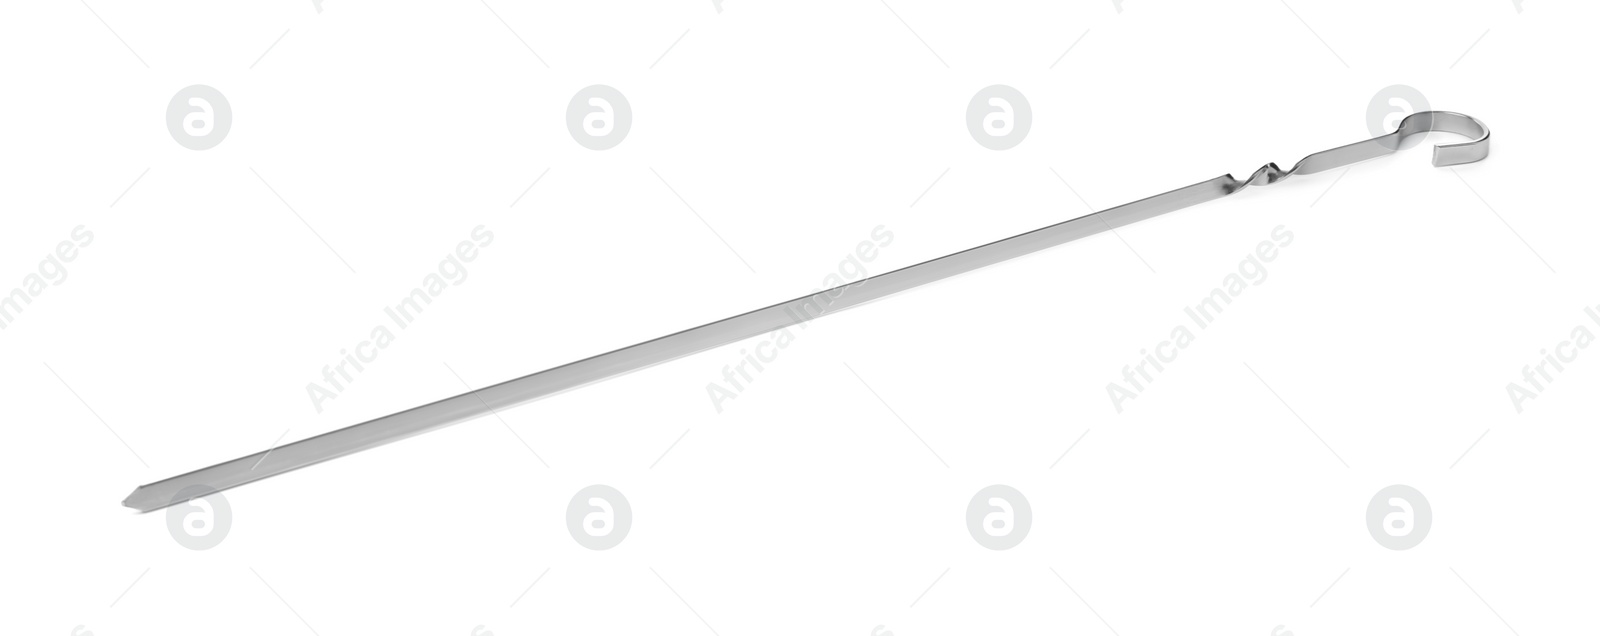 Photo of Metal skewer on white background. Barbecue utensil